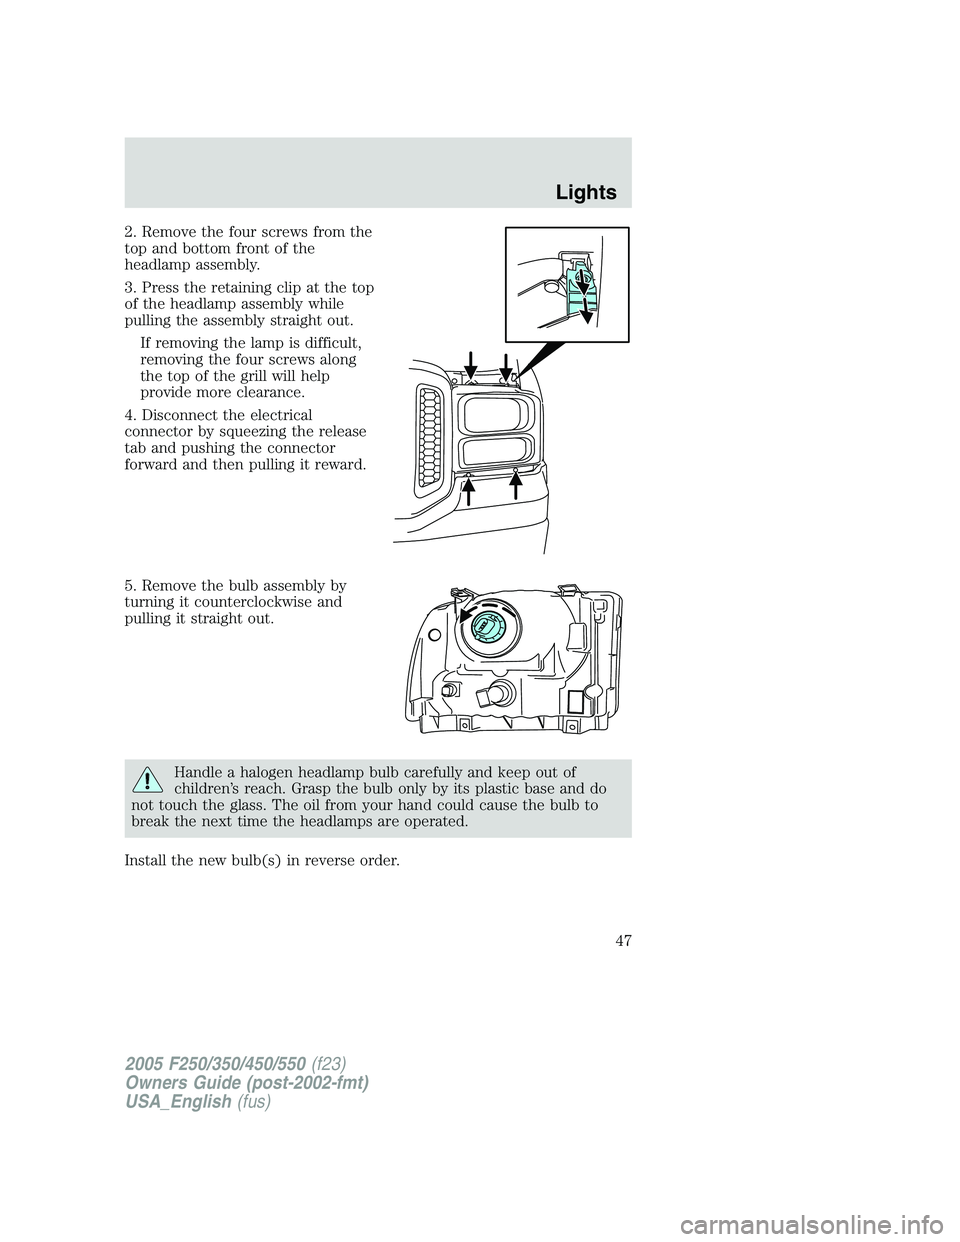 FORD F250 SUPER DUTY 2005  Owners Manual 2. Remove the four screws from the
top and bottom front of the
headlamp assembly.
3. Press the retaining clip at the top
of the headlamp assembly while
pulling the assembly straight out.
If removing t